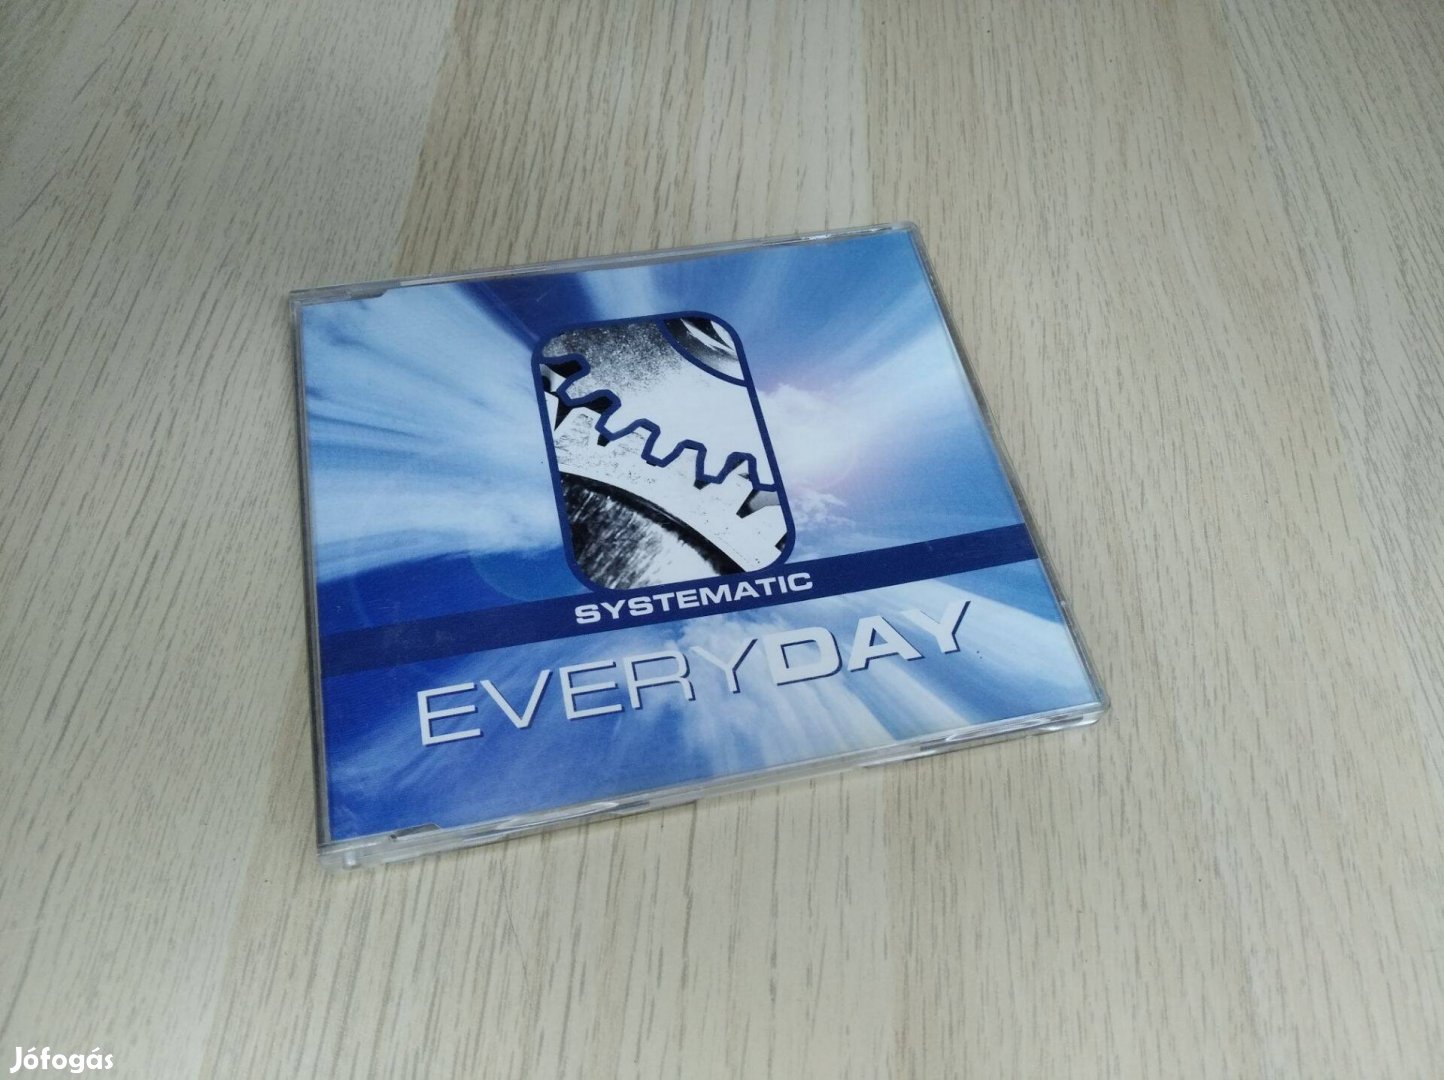 Systematic - Everyday / Maxi CD